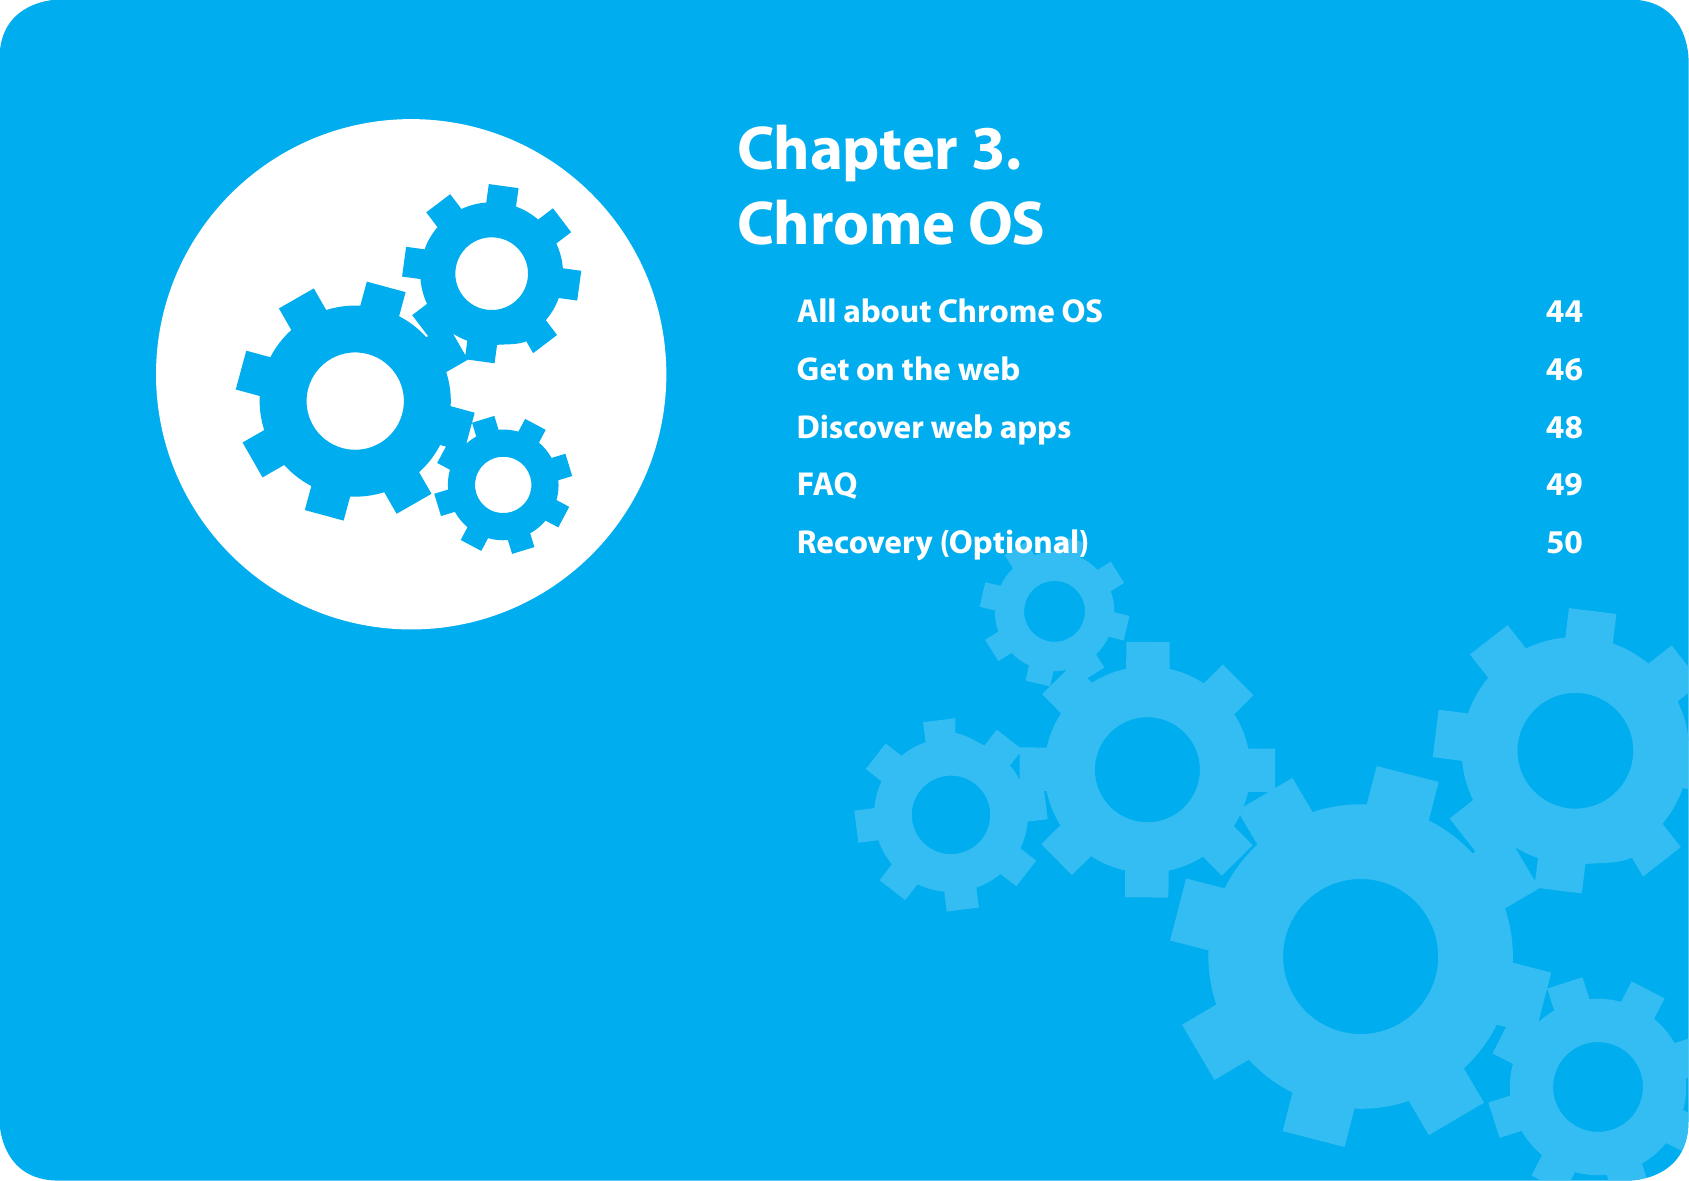 All about Chrome OS  44Get on the web  46Discover web apps  48FAQ  49Recovery (Optional)  50  Chapter 3. Chrome OS